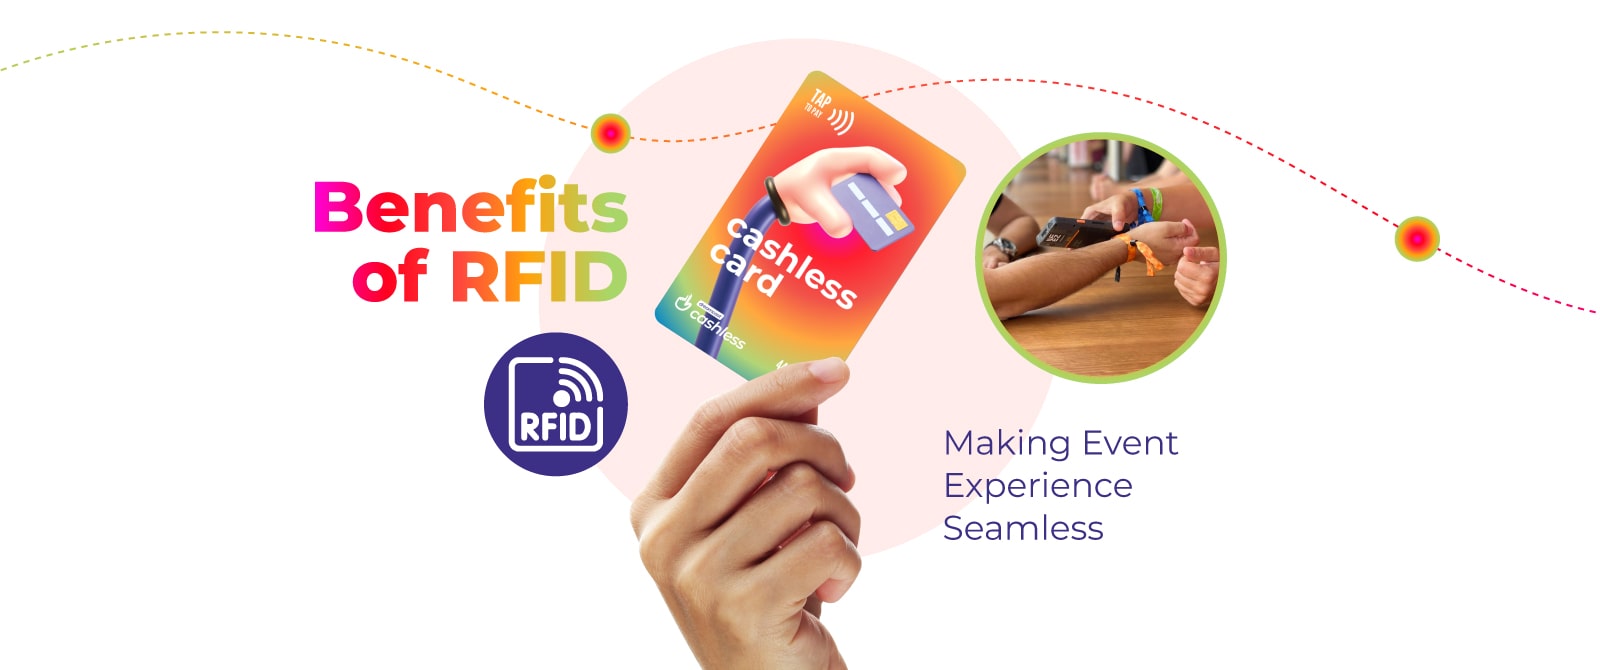 Benefits of RFID for Events: Making Event Experience Seamless